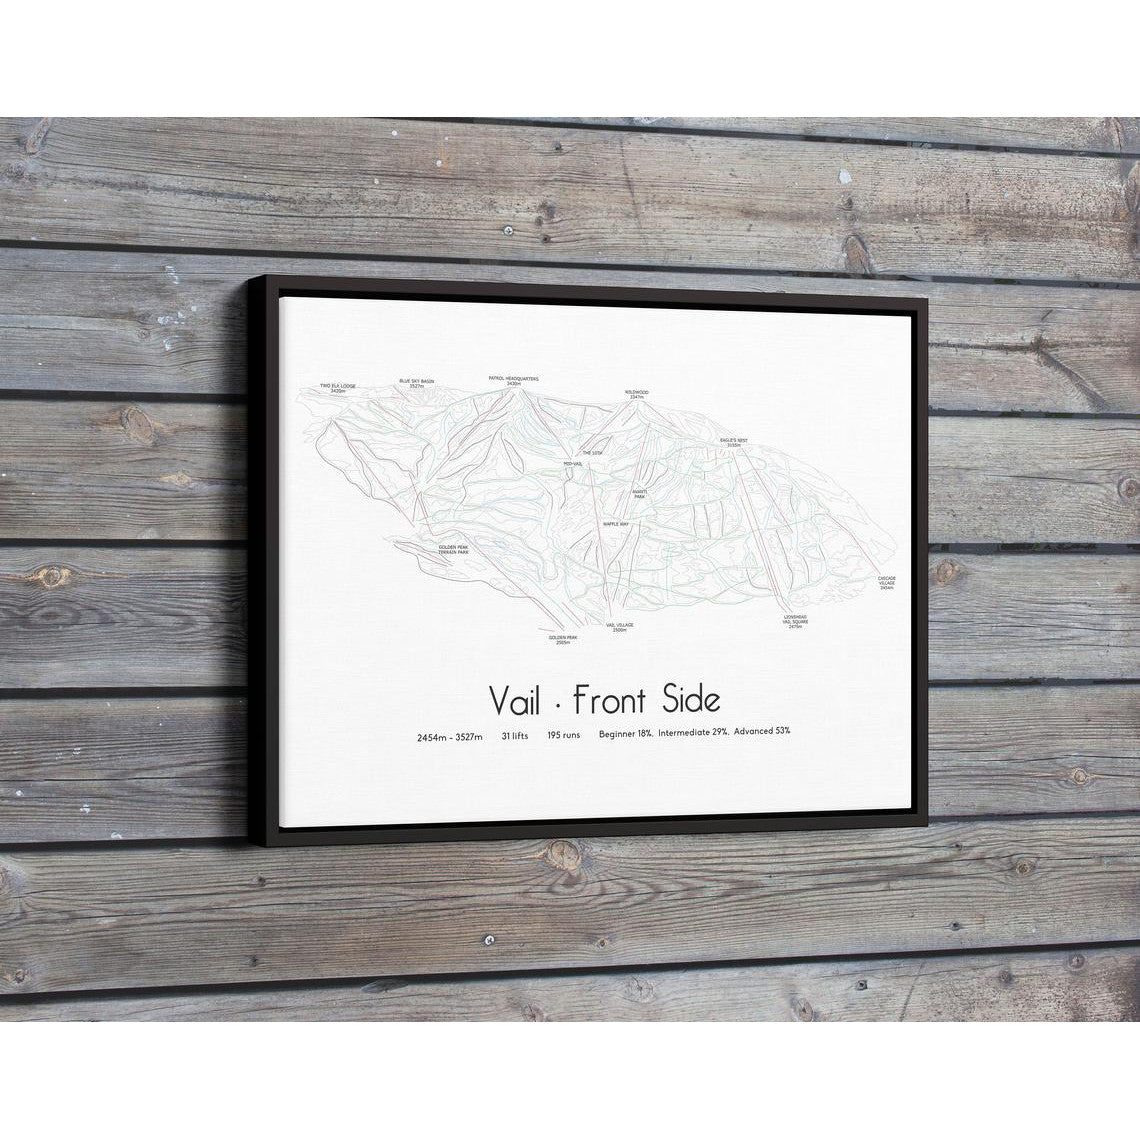 Vail Piste Map Wall Print Poster | Backcountry Books